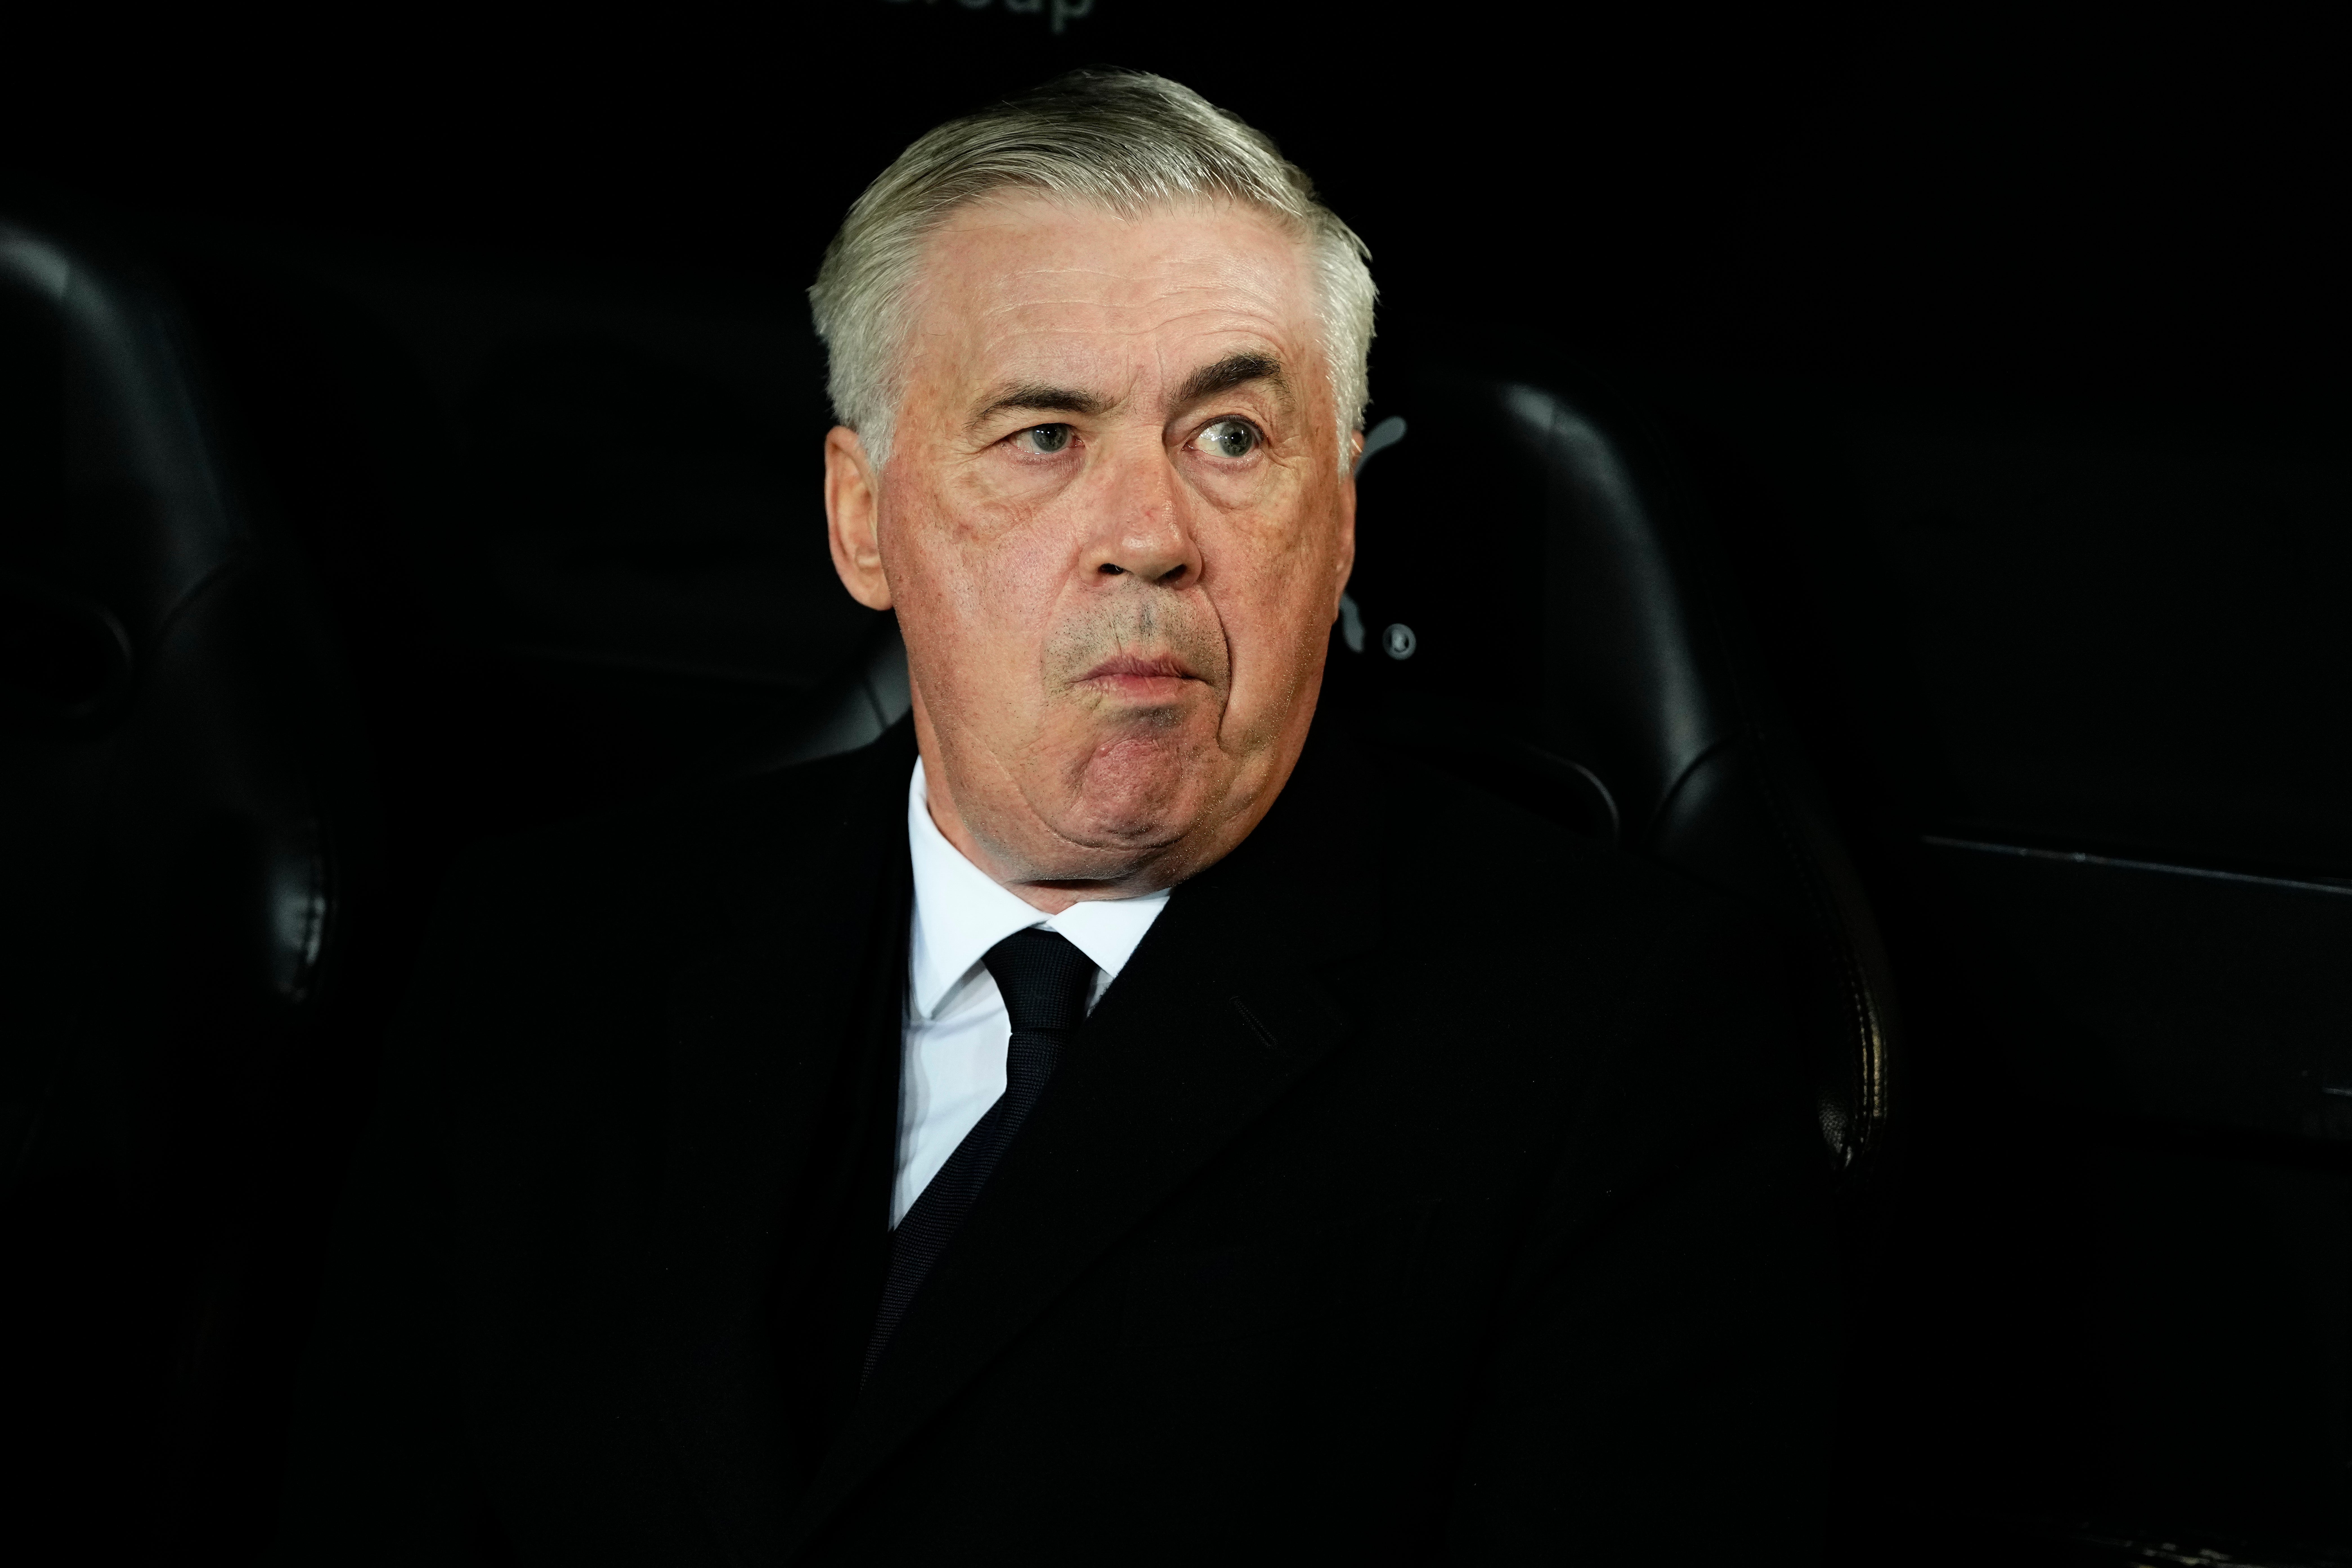 Ancelotti is being accused of tax fraud by Spanish state prosecutors